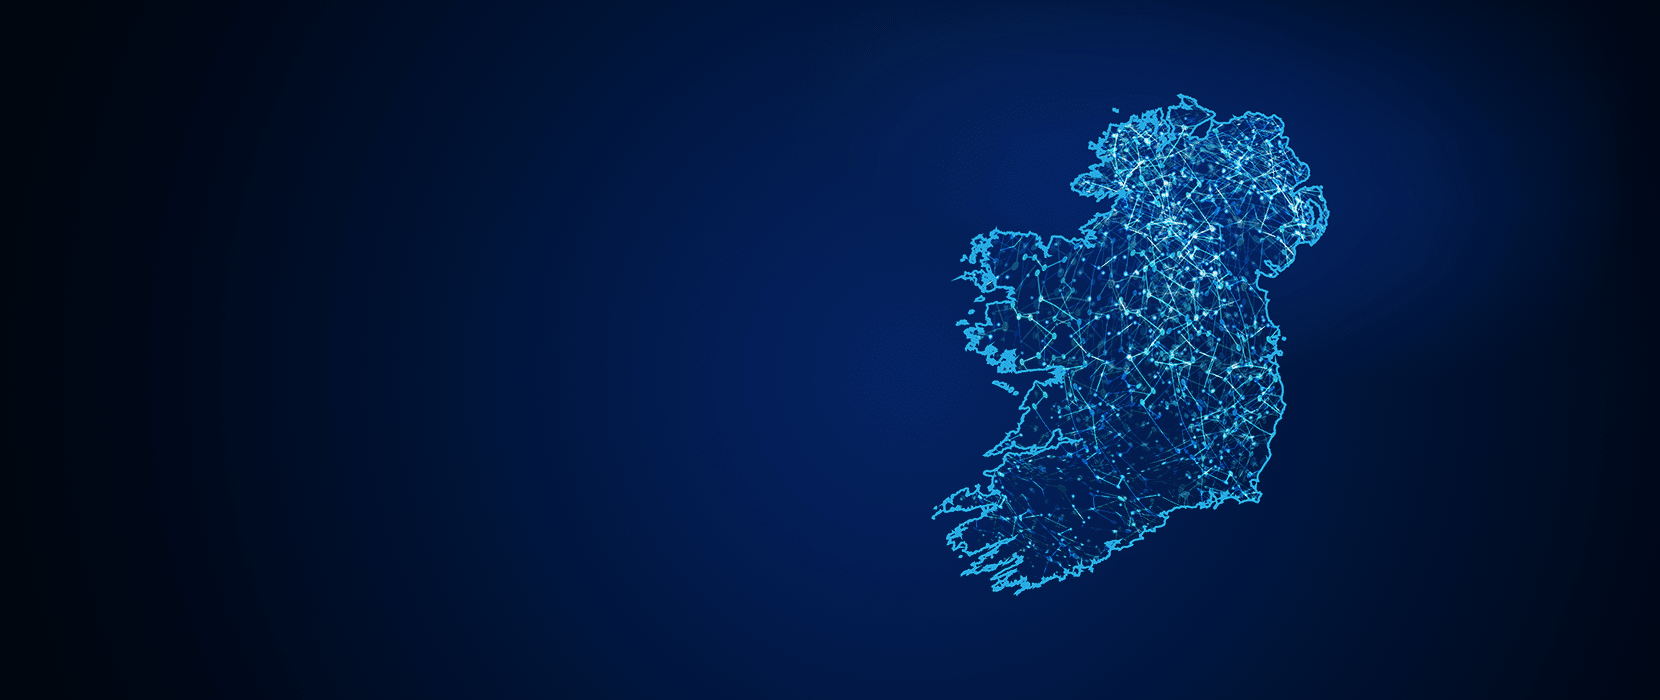 Irish customers ‘extremely concerned’ about the data companies hold on them